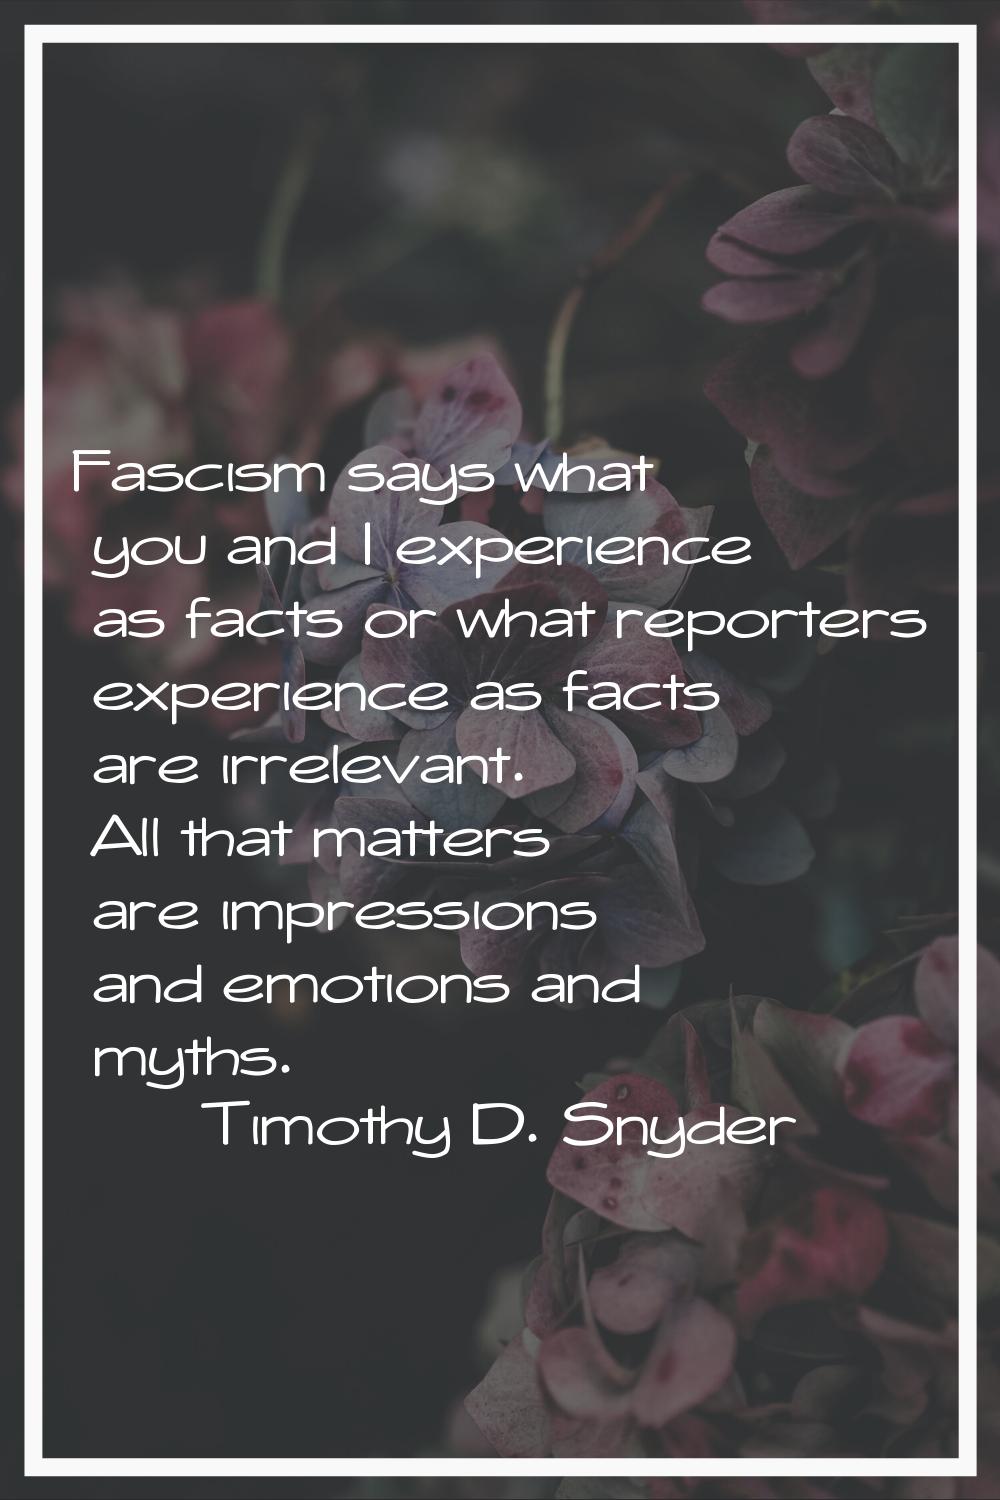 Fascism says what you and I experience as facts or what reporters experience as facts are irrelevan